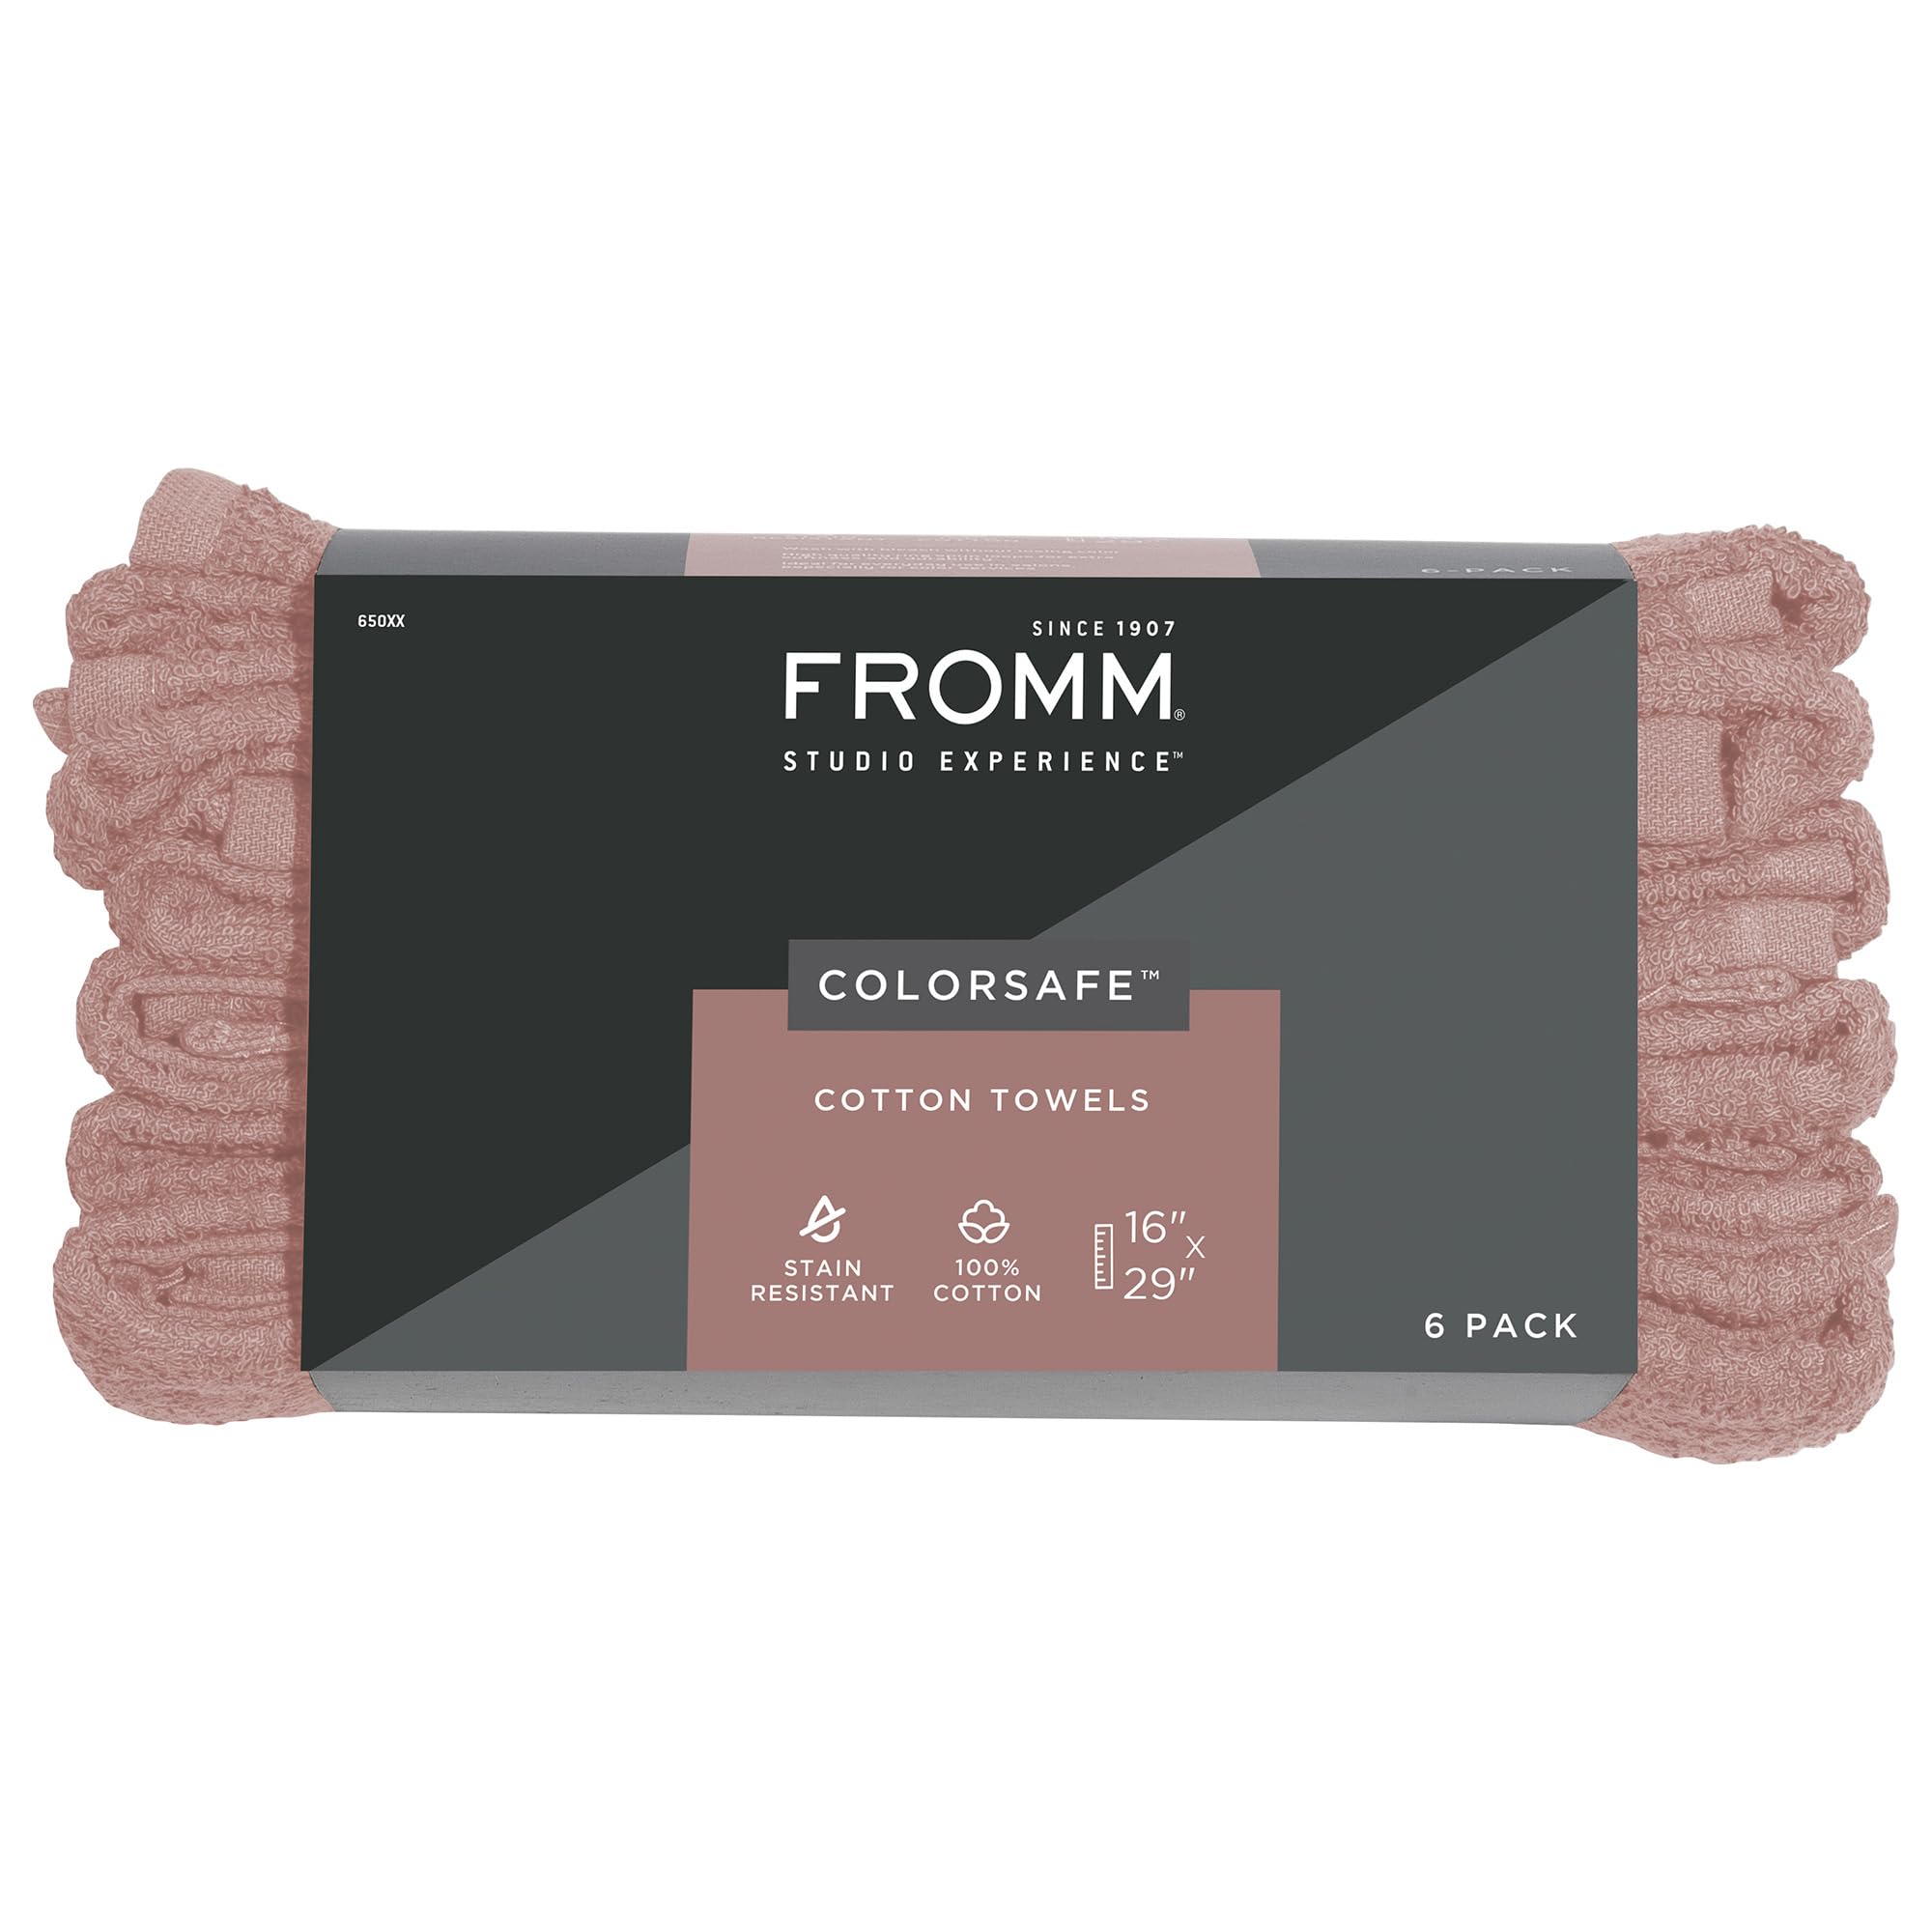 Fromm ColorSafe 100% Cotton Bleach Proof Salon Hair Towels for Hairstylists, Barbers, Spa, Gym in Terracotta, 16